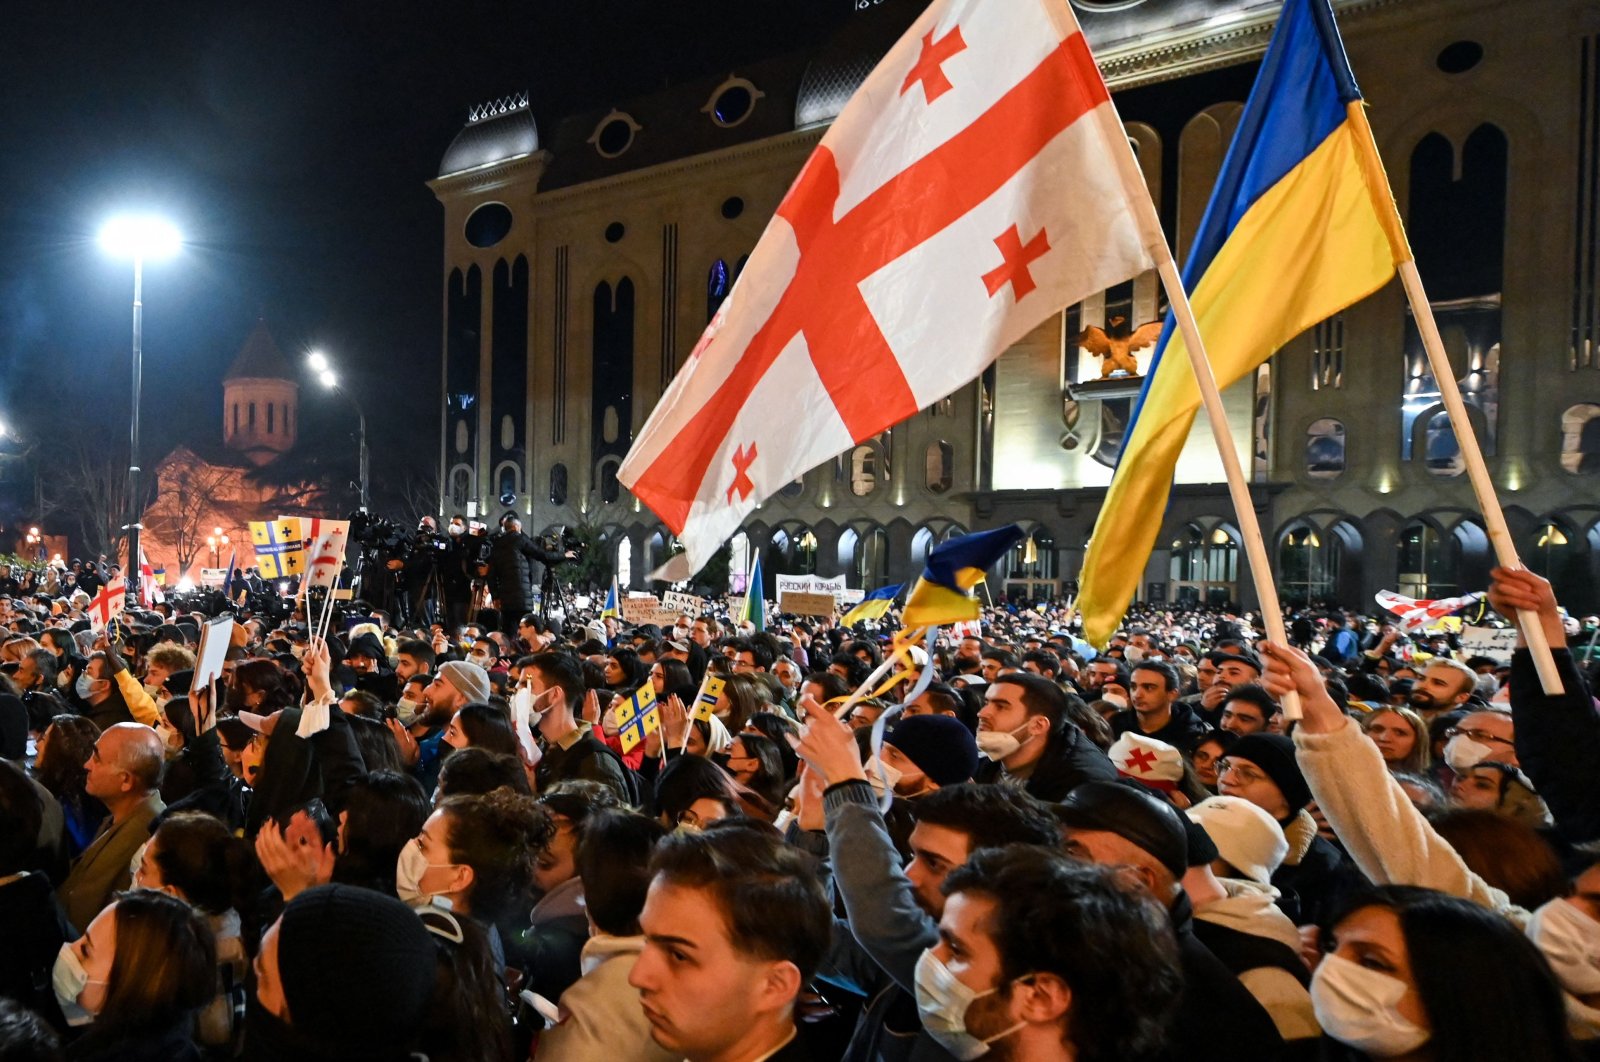 Demonstrators hold placards and wave flags during a rally in support of Ukraine in Tbilisi, Georgia, March 1, 2022. (AFP Photo)